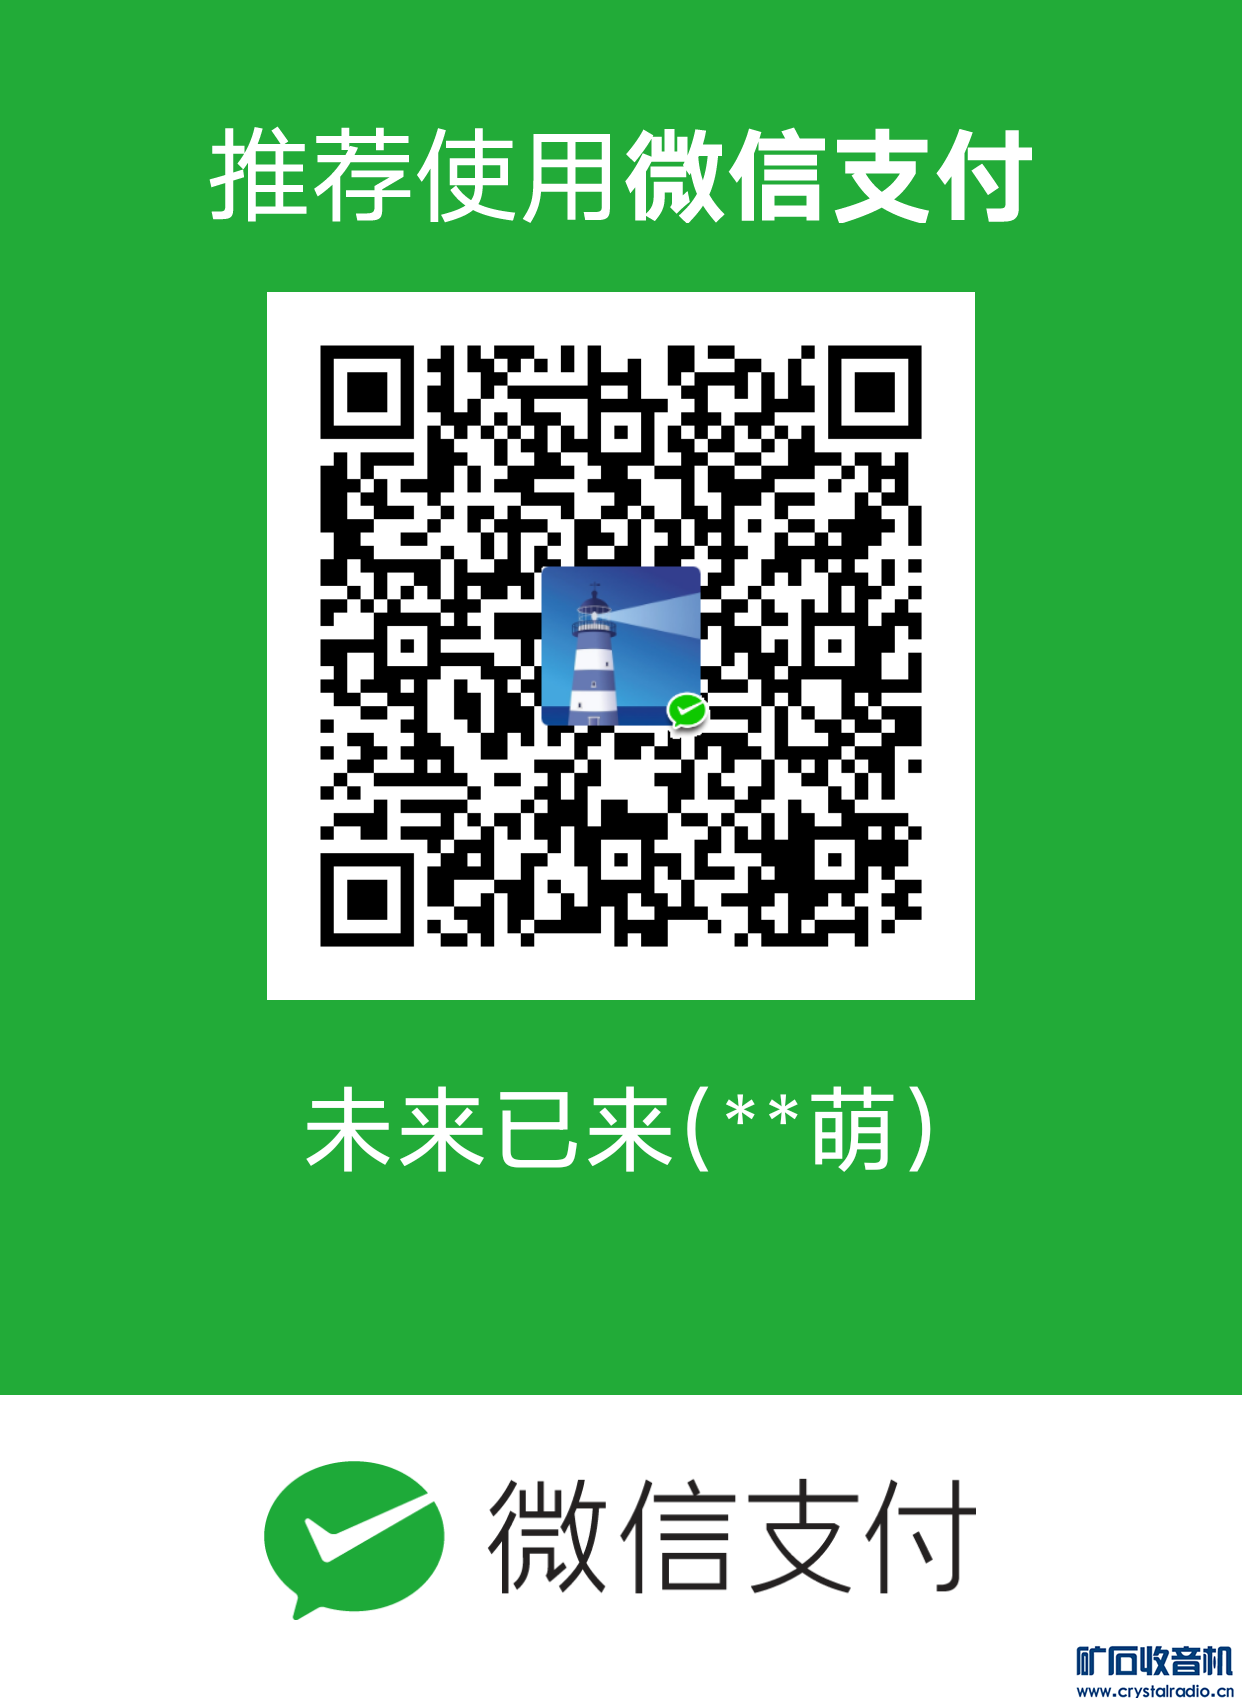 mm_facetoface_collect_qrcode_1652192341325.png